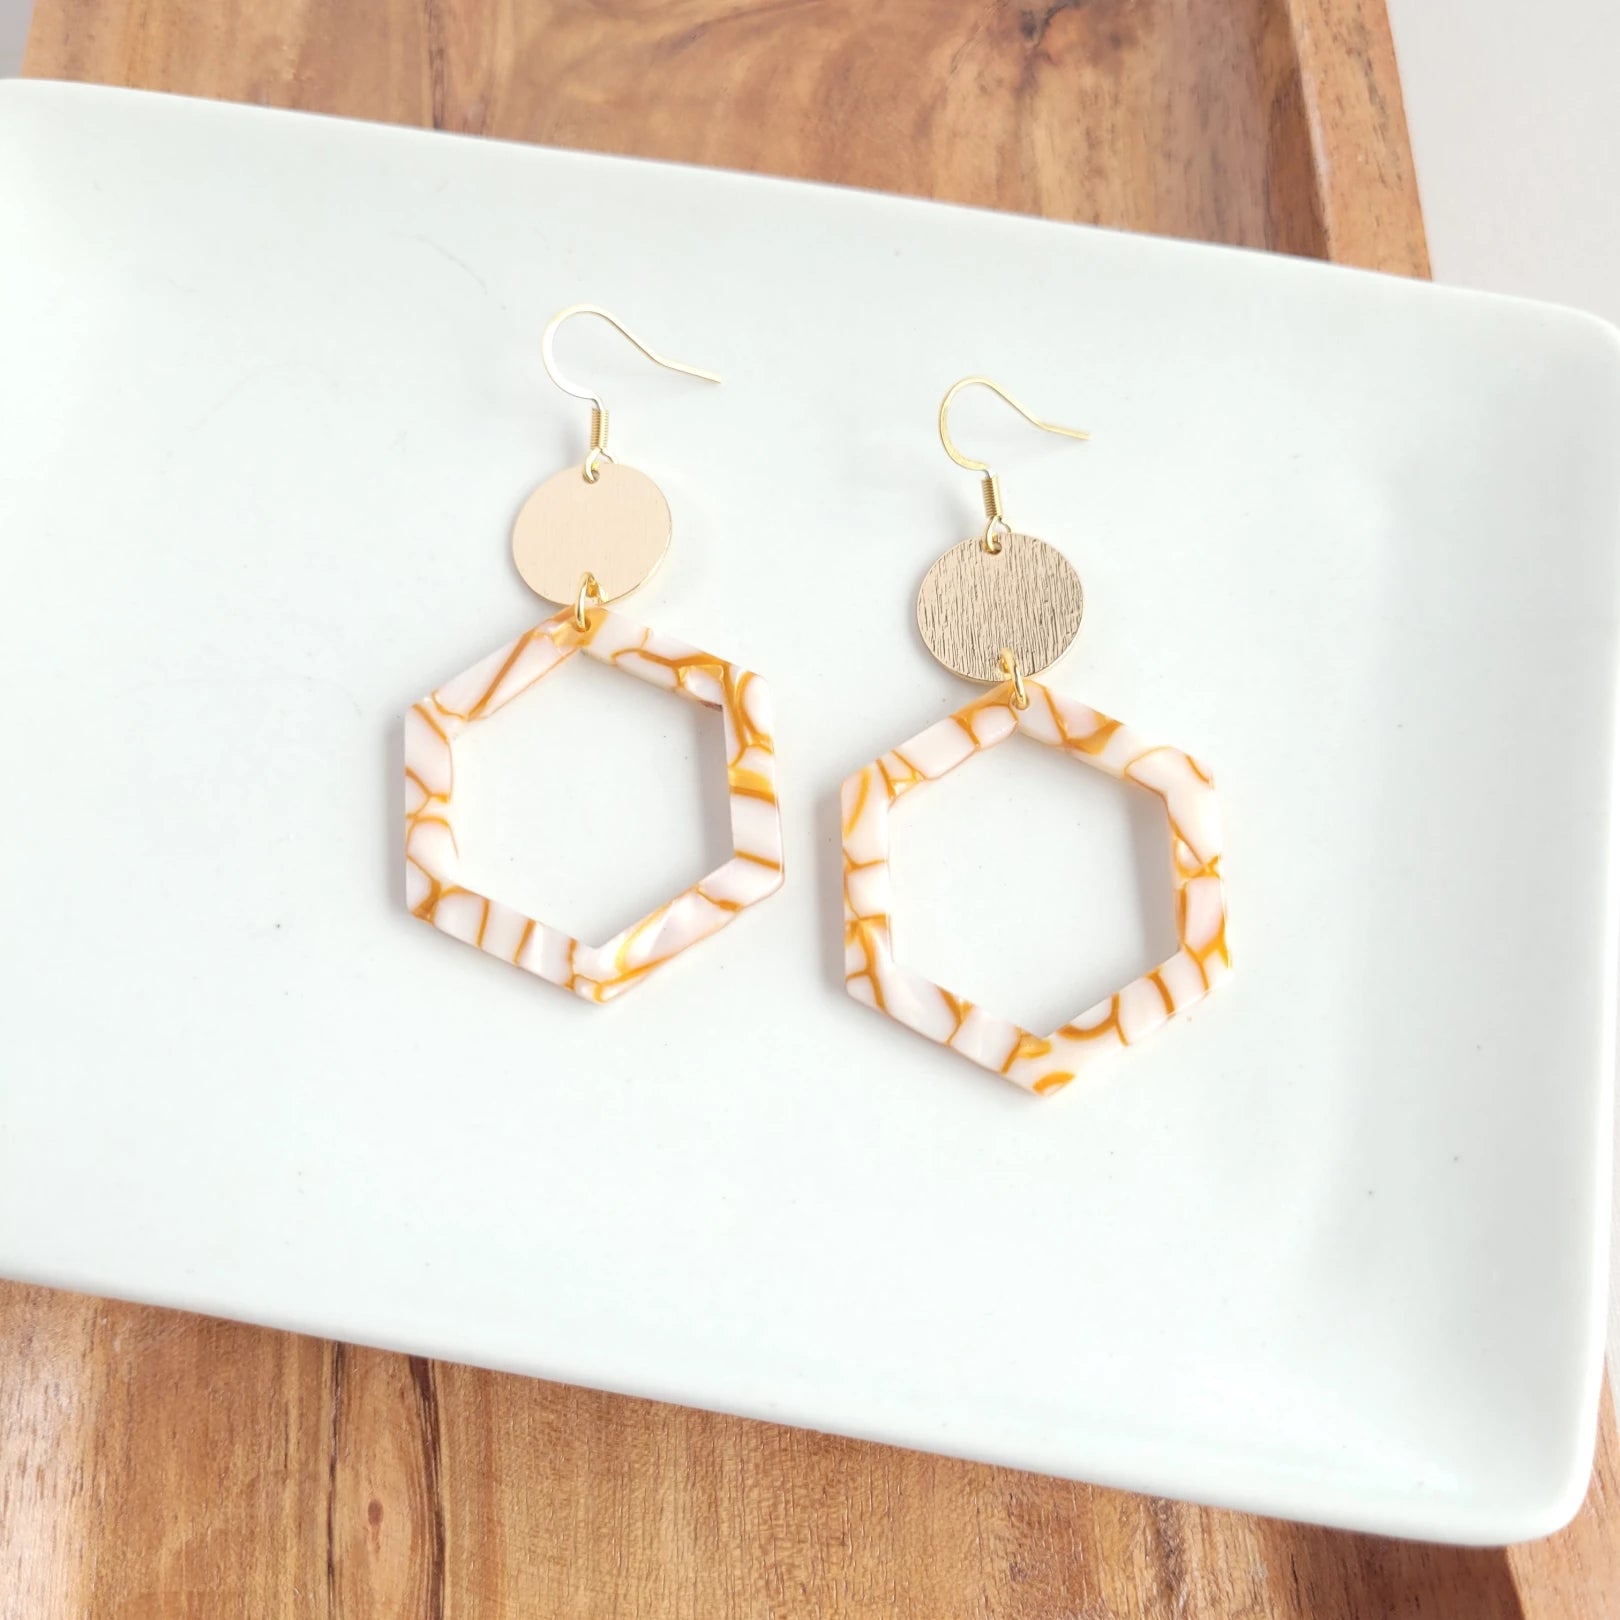 Lennox is a fun style with cut-out hexagon charms paired perfectly with gold accents.  18k gold-plated hypoallergenic stainless steel hooks Gold-plated brushed brass charms Lightweight and durable plant-based acetate acrylic charms in pumpkin spice